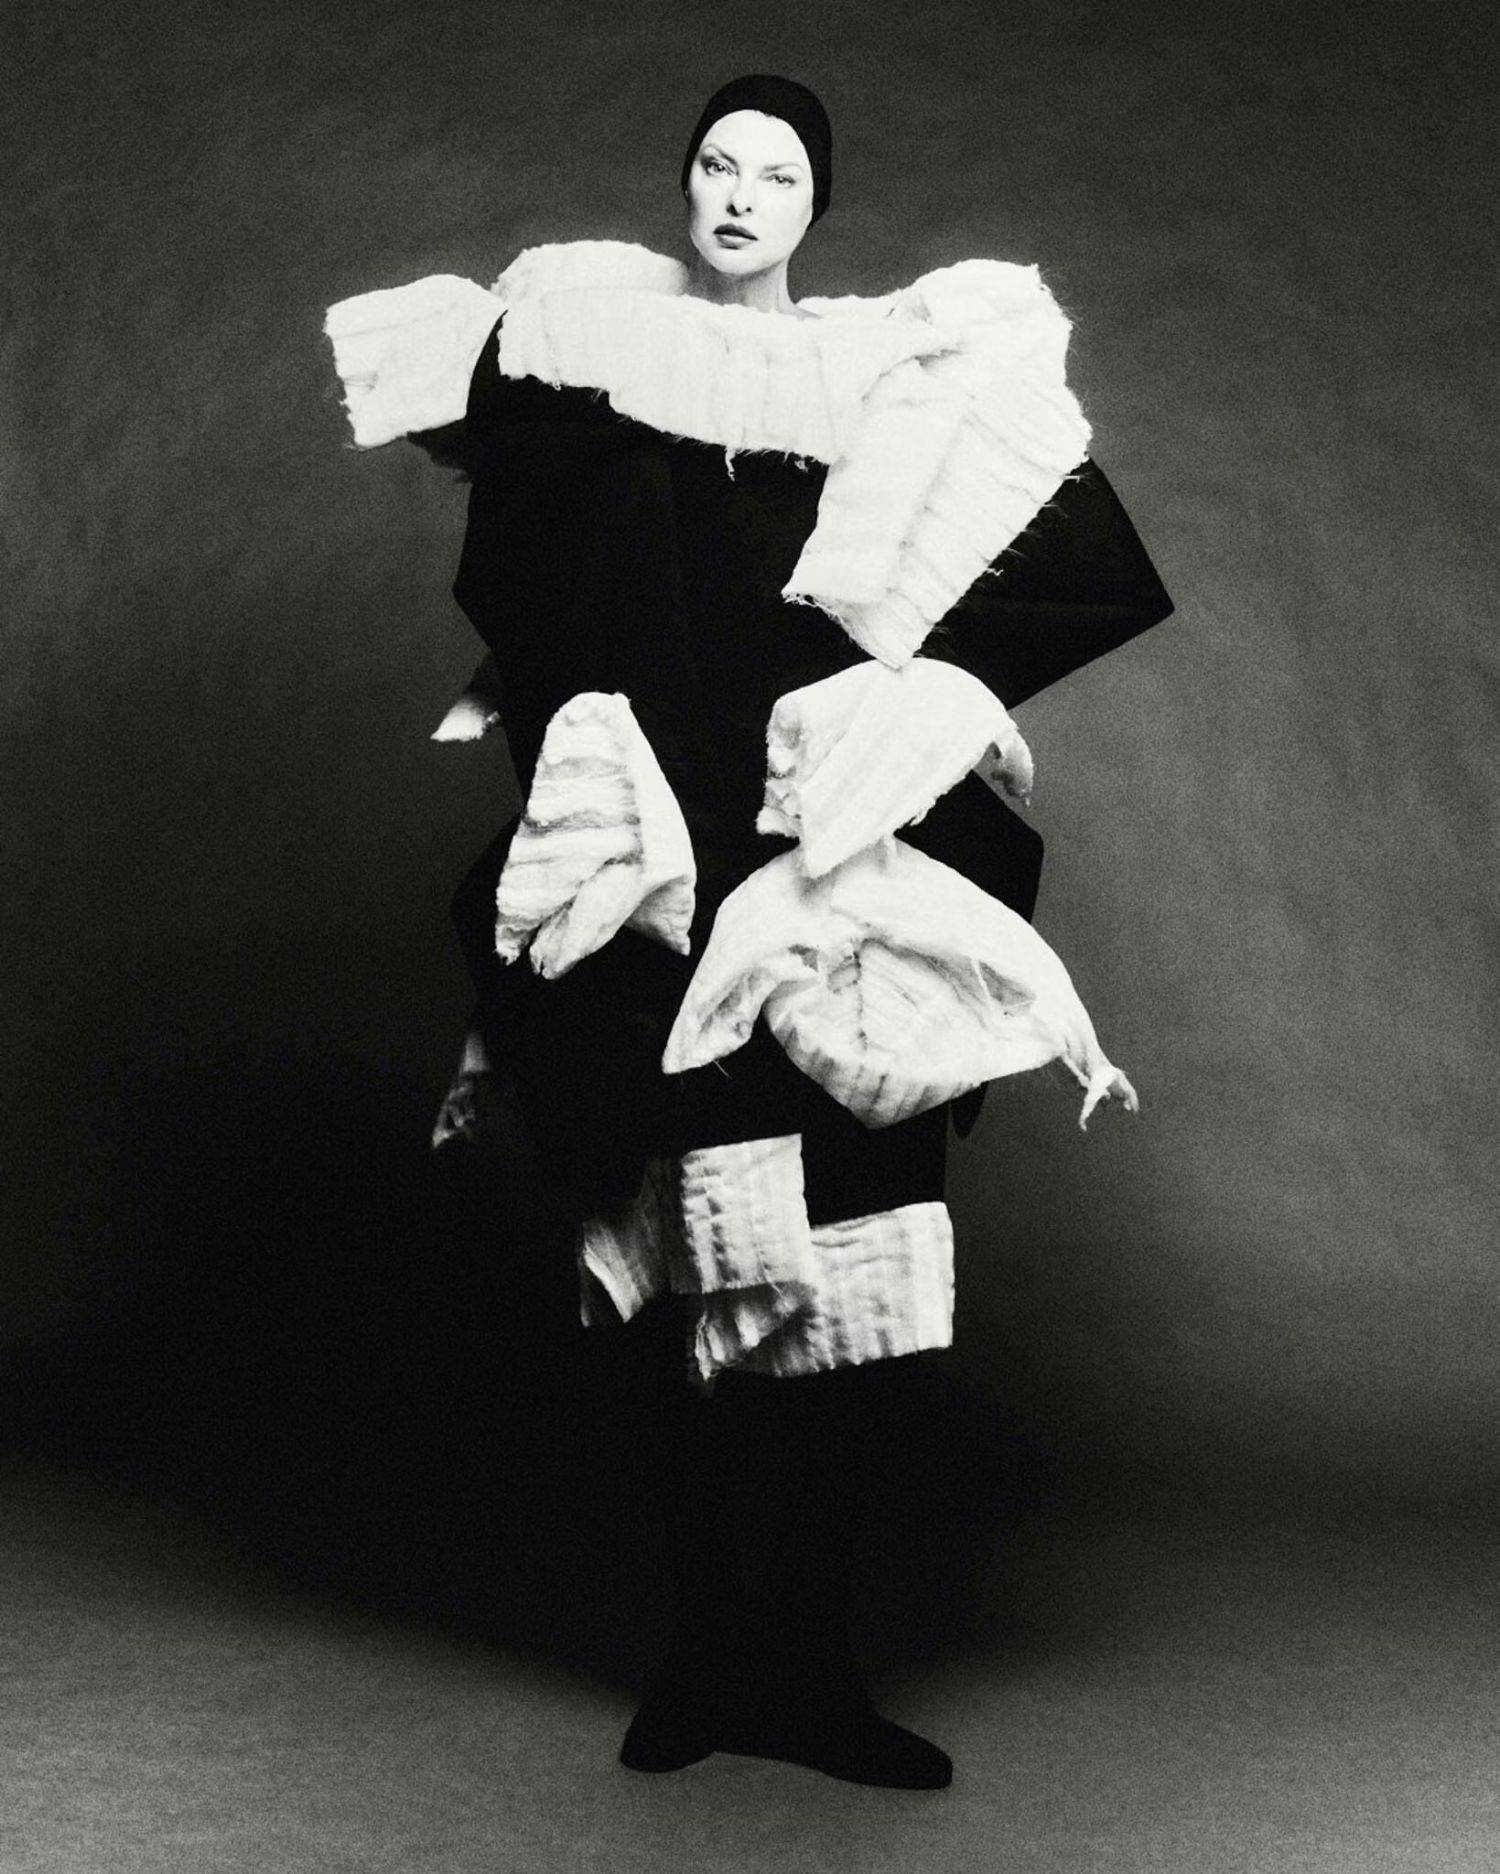 Linda Evangelista in Comme des Garcons by Robin Galiegue for D Repubblica Magazine September 2023